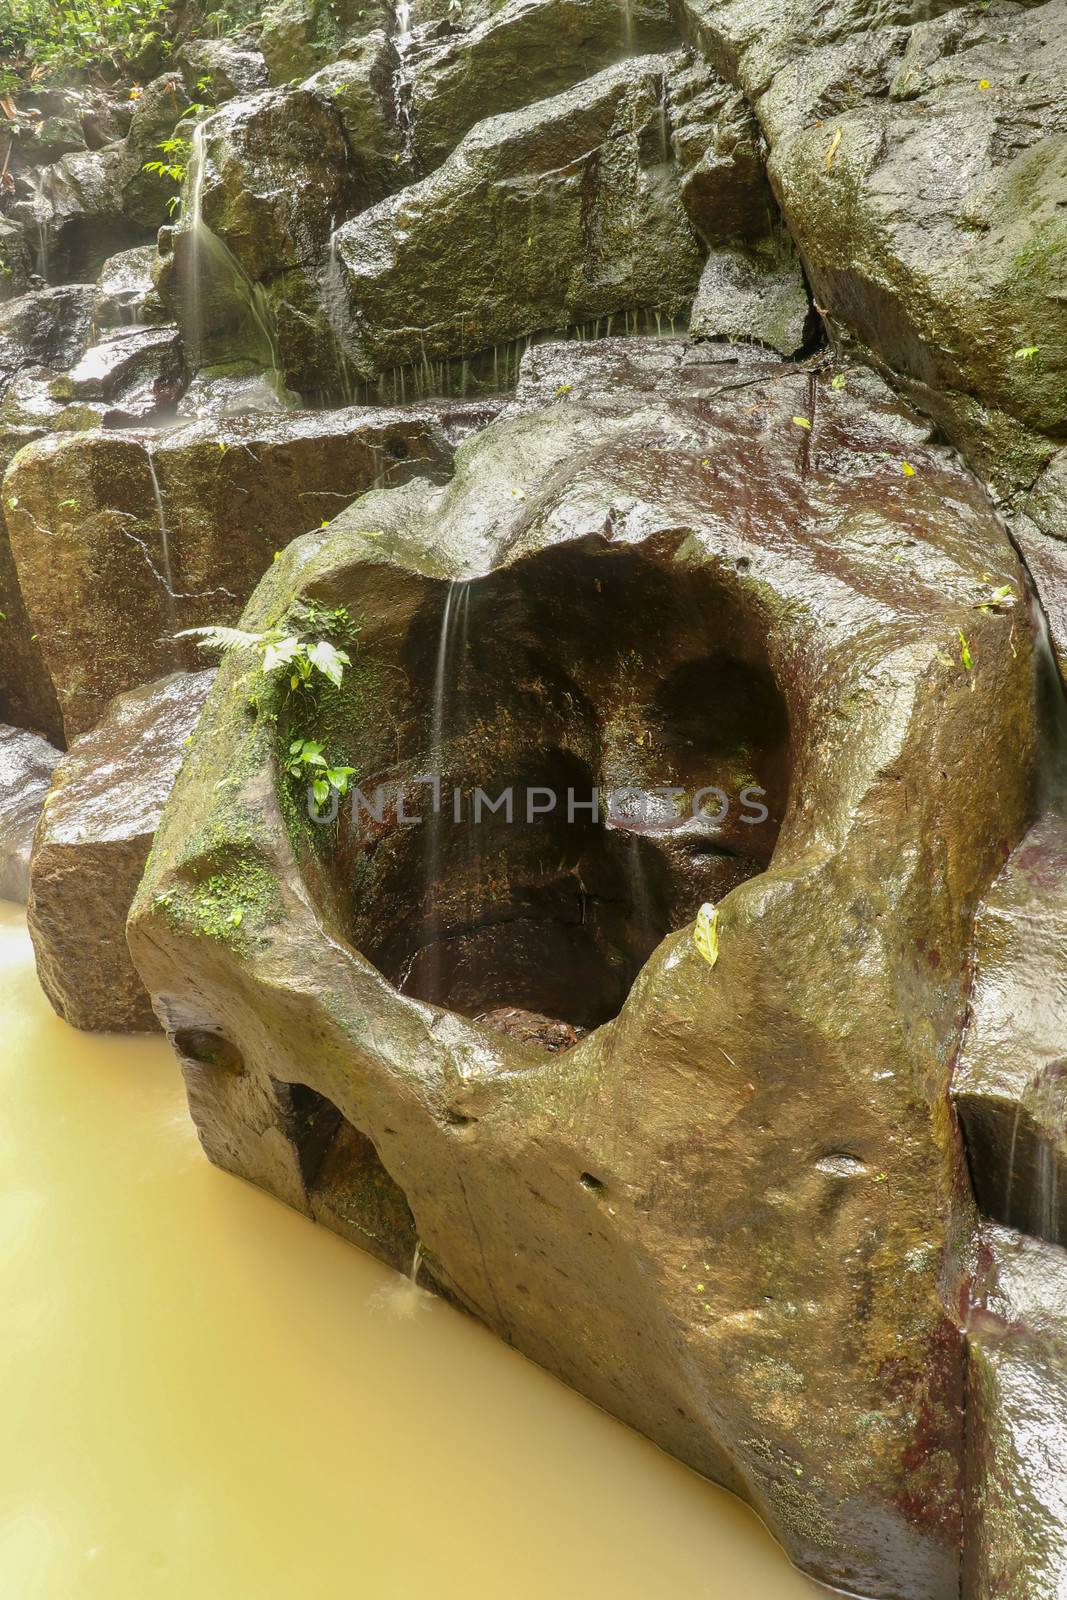 Erosion created hole in the shape of a heart in the rock. A heart shaped gap in the stone of a river bed in Bali, Indonesia.